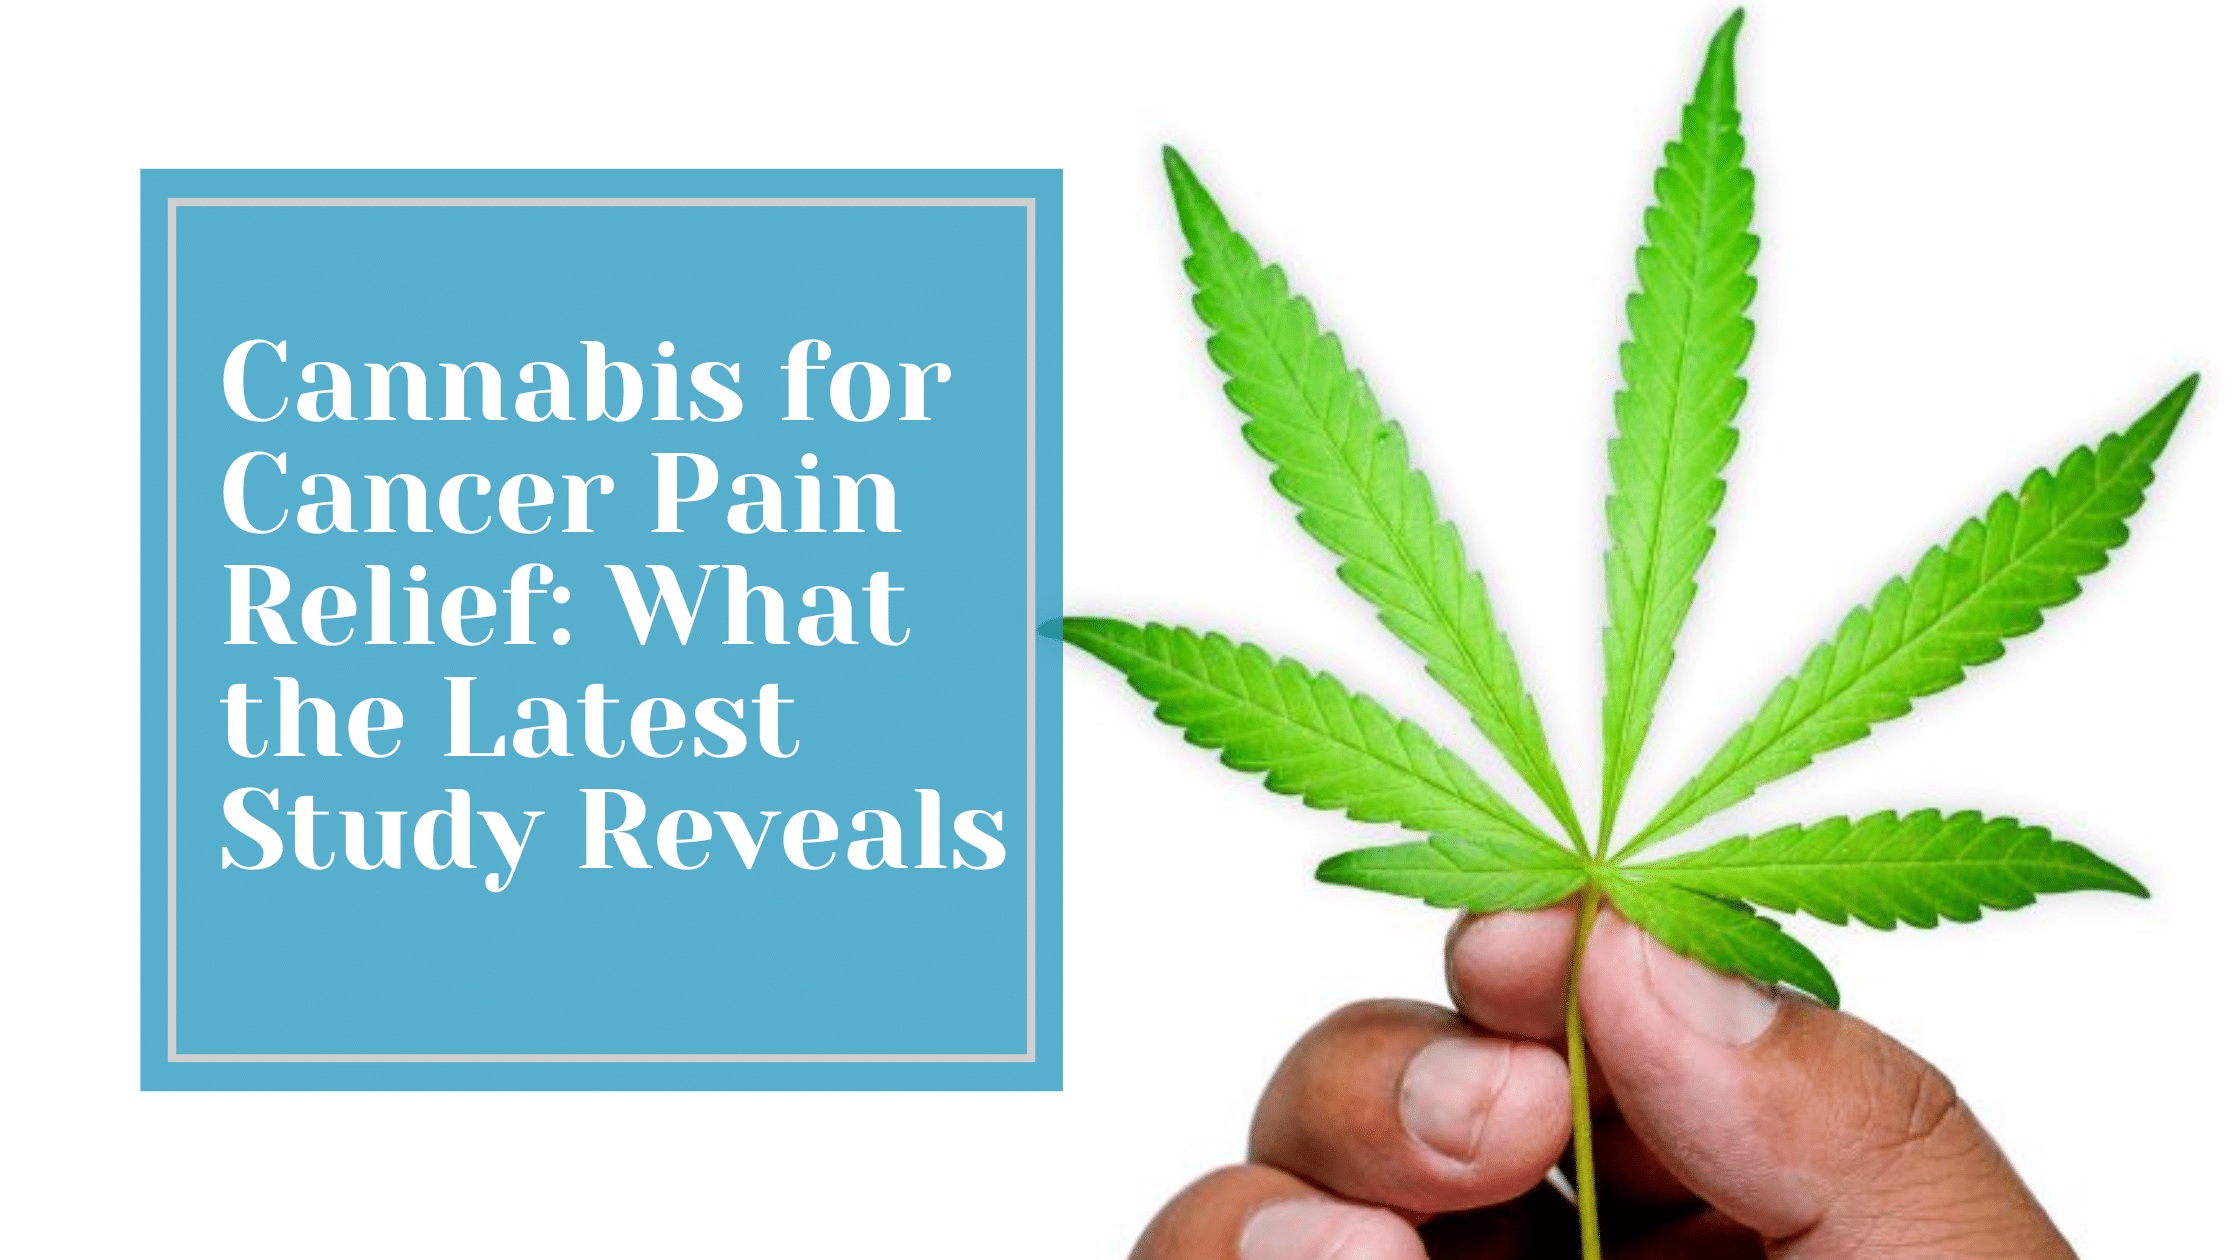 Cannabis for Cancer Pain Relief